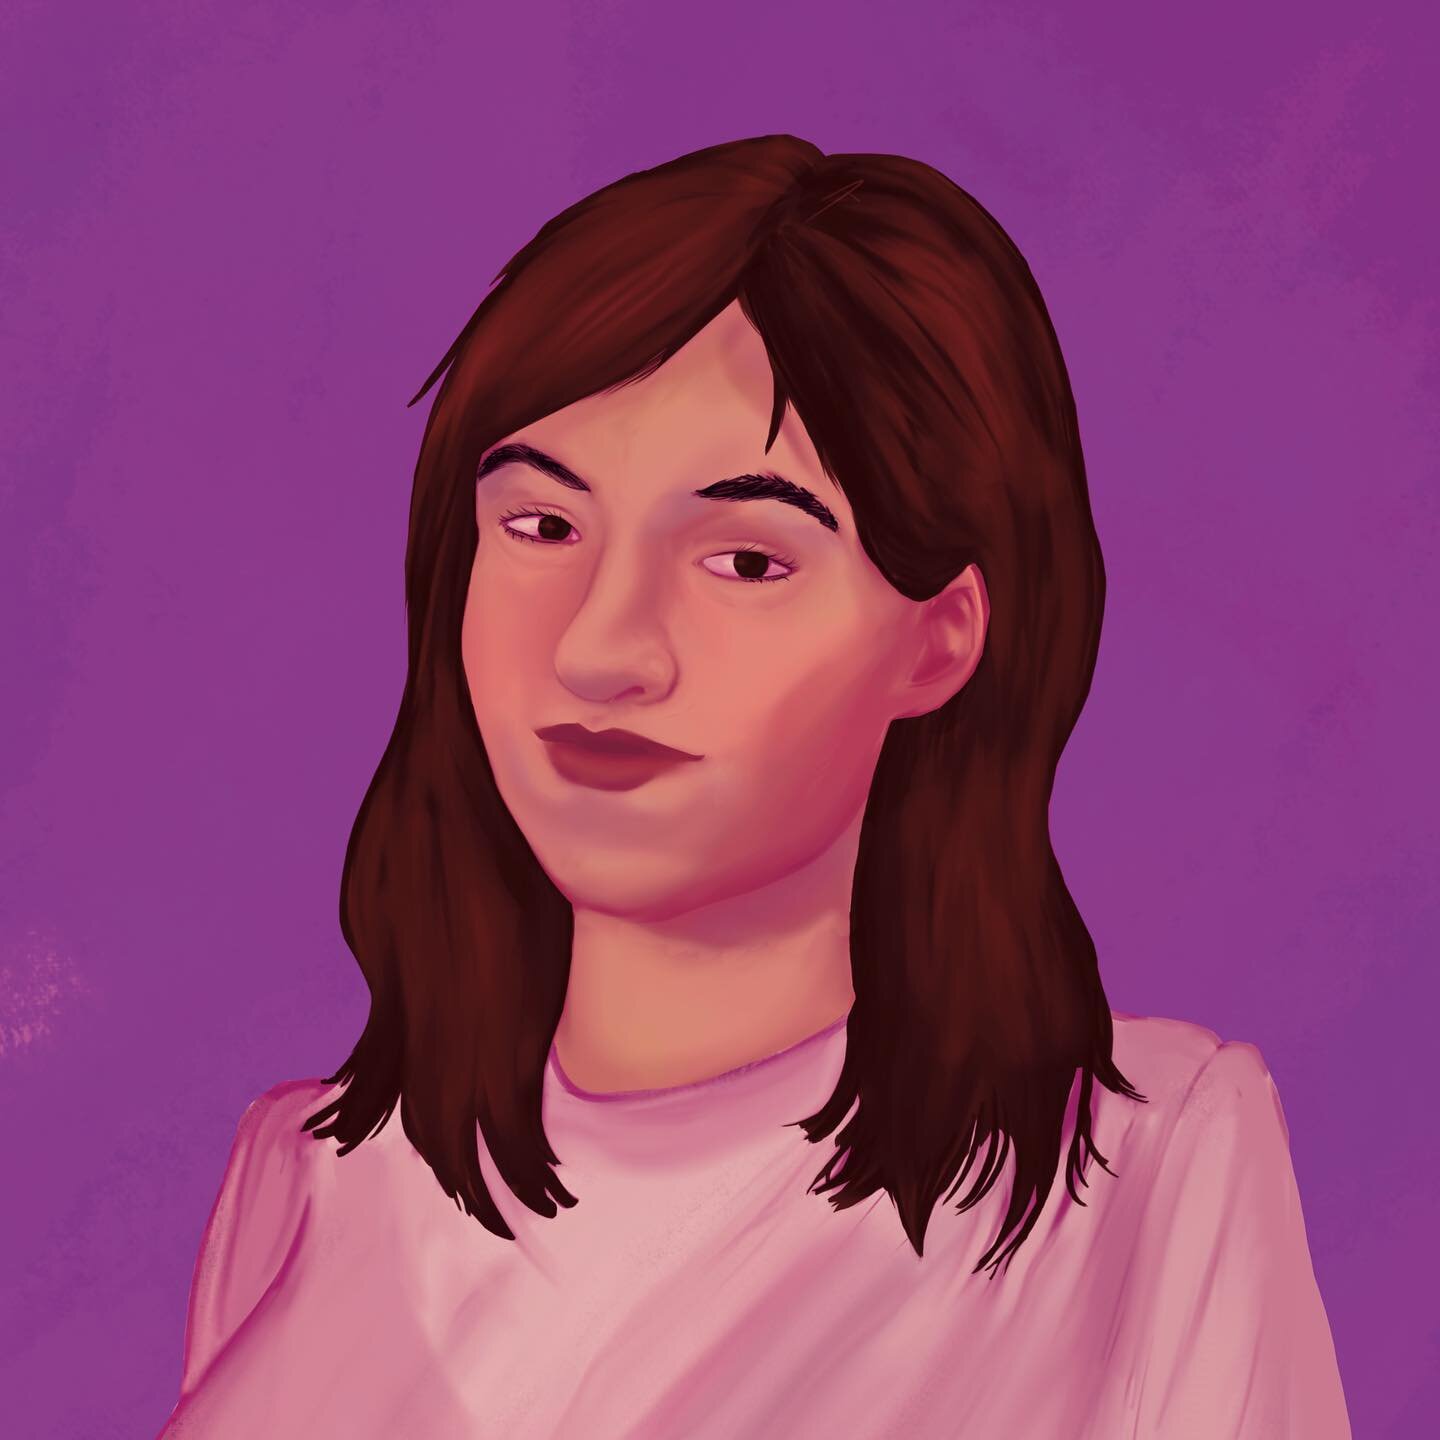 New profile picture ✨ 

I&rsquo;m changing from the Yumi painting to a self portrait! I hope you like it 💜 

I felt like the red really stood out too much compared to the other purple paintings I have. 

This is definitely a new chapter in my art wi